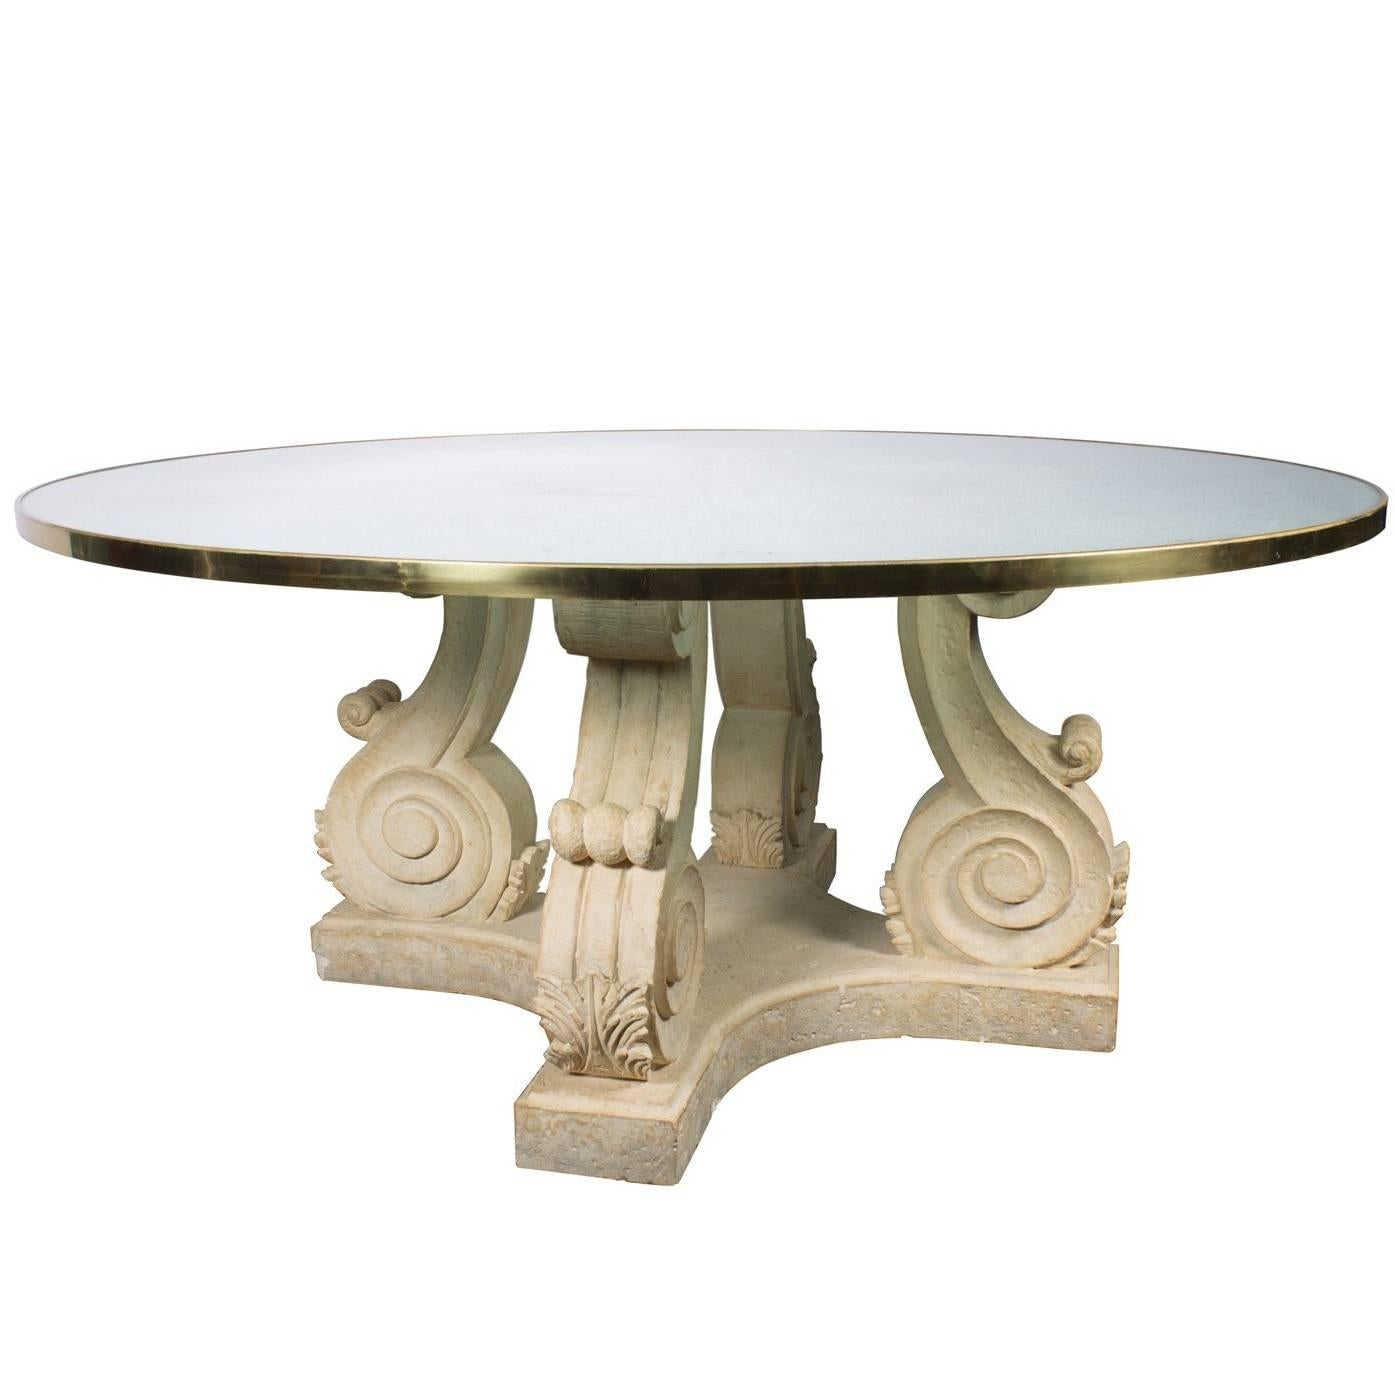 Steve Chase Round Crackled Glass Top Table with Carved Solid Stone Base